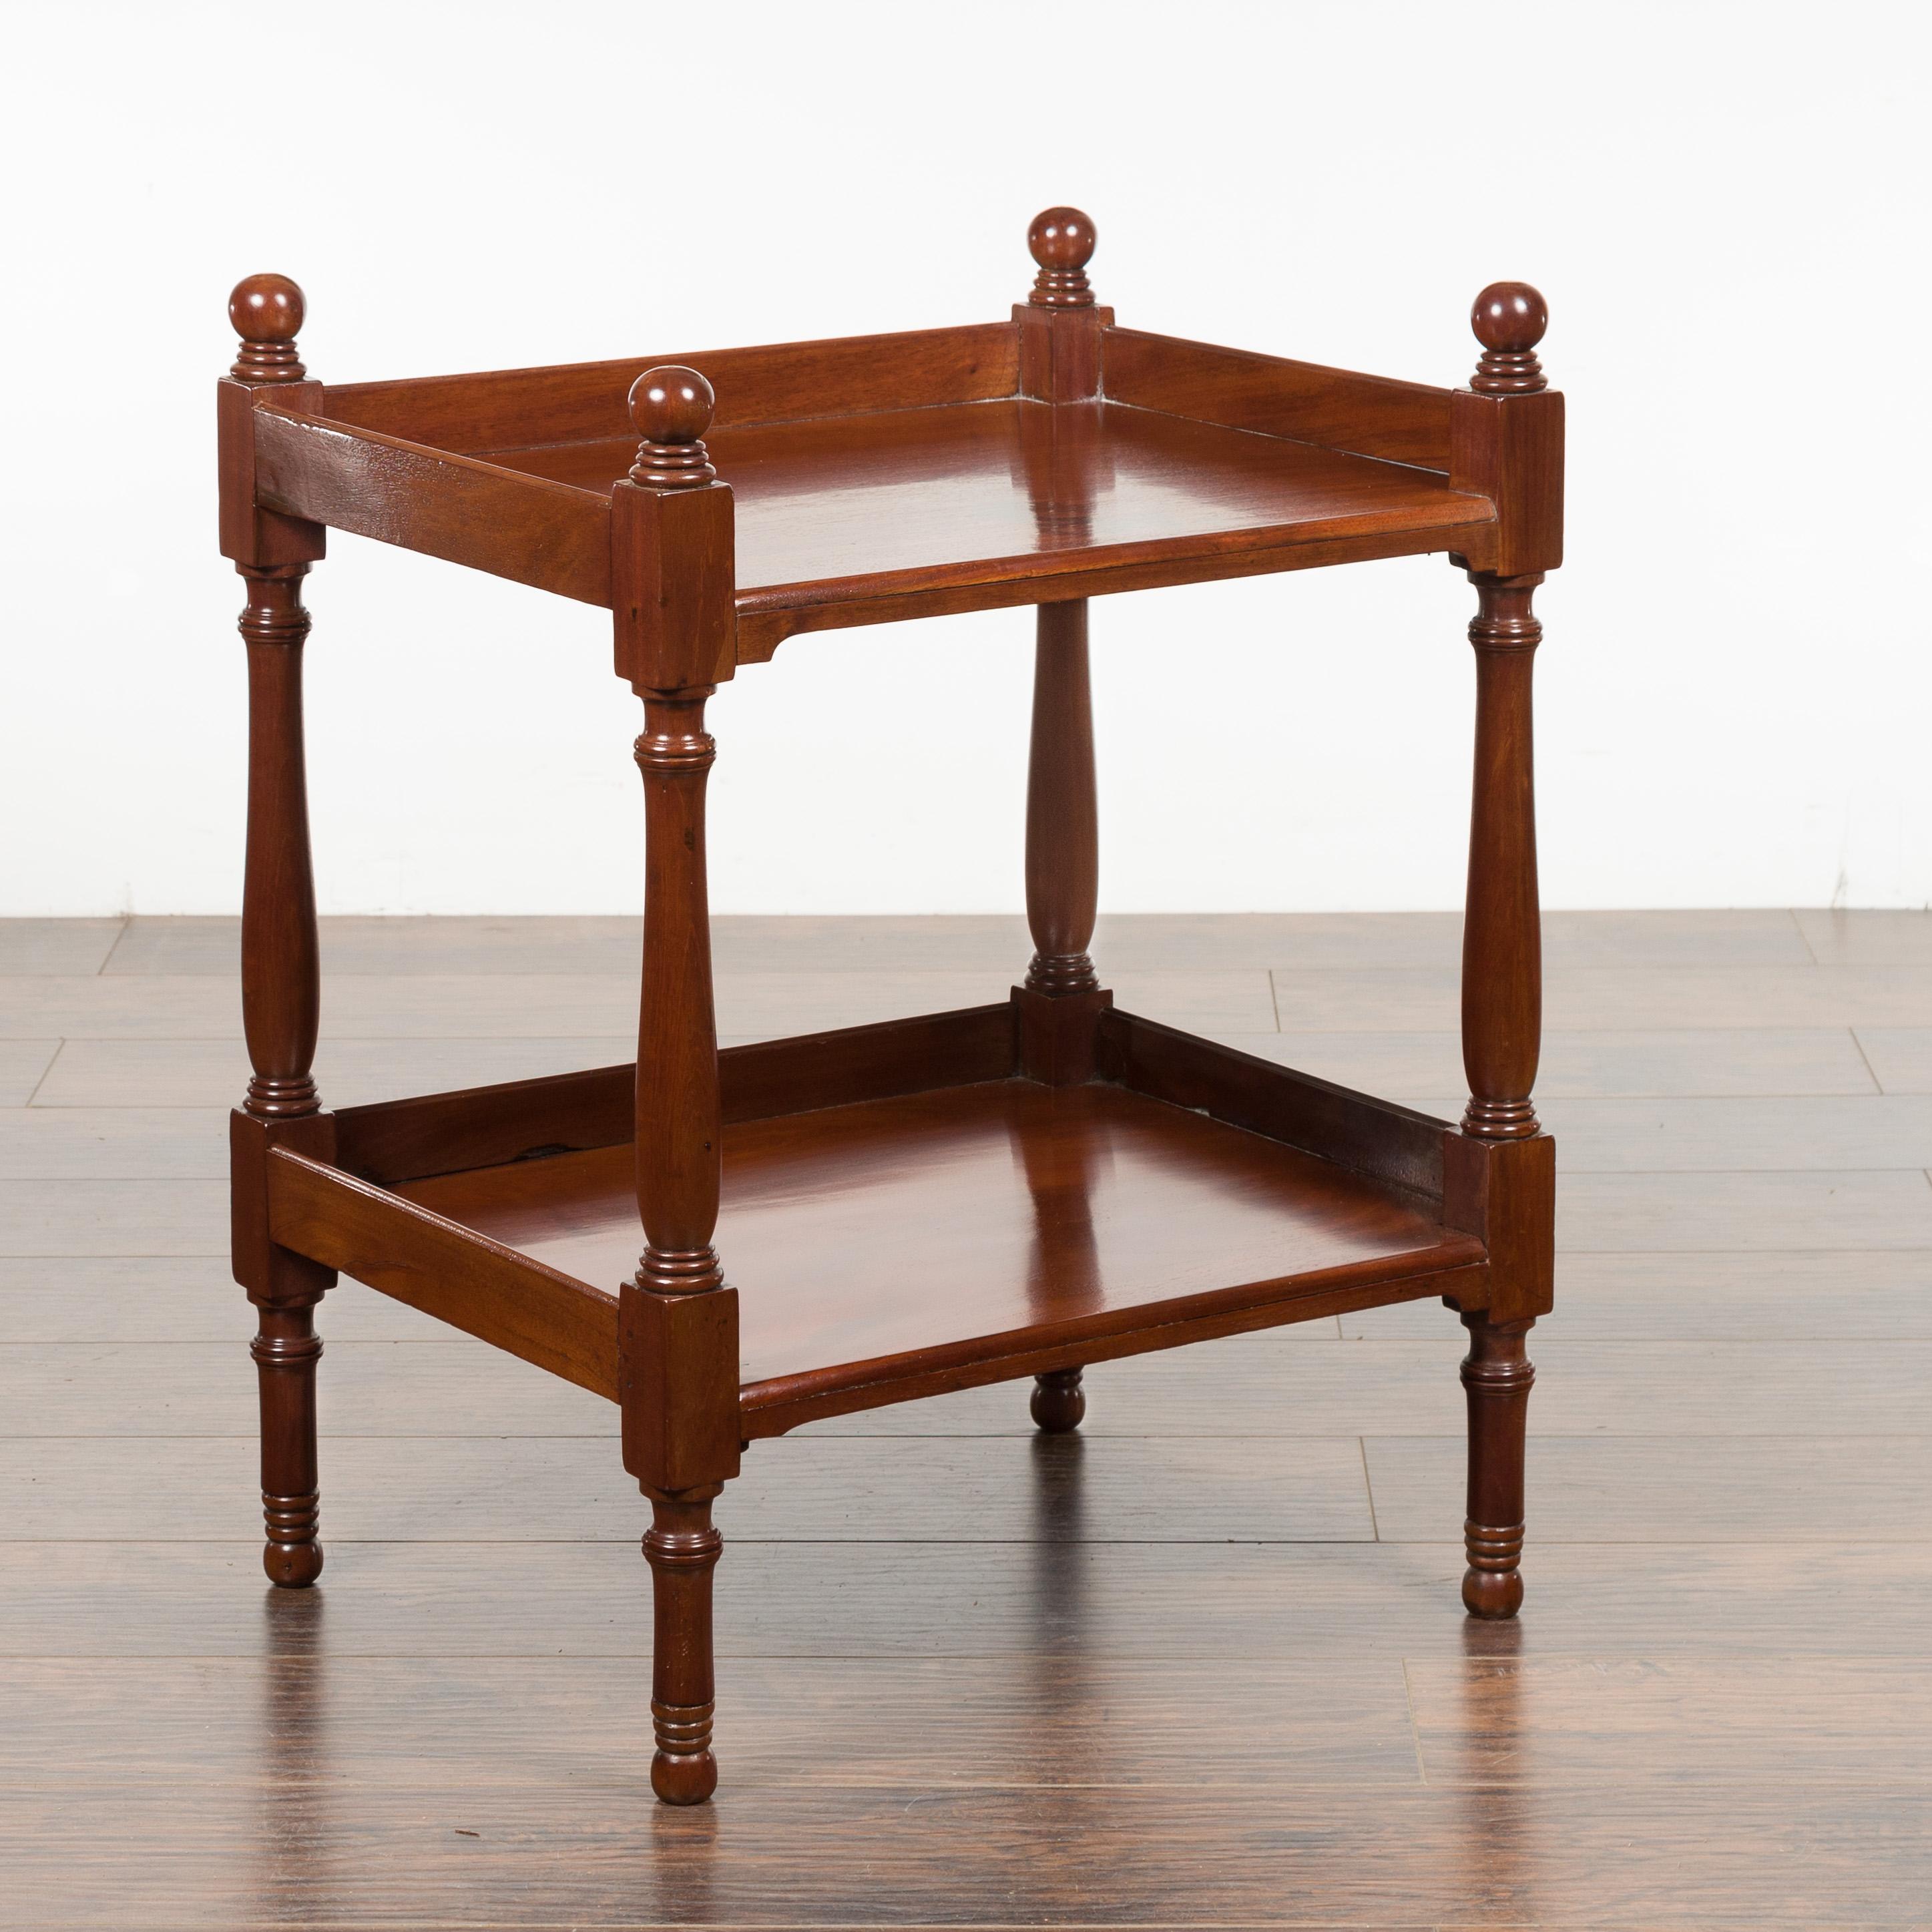 English 1870s Mahogany Tiered Table with Turned Legs and Low Shelf and Finials 5